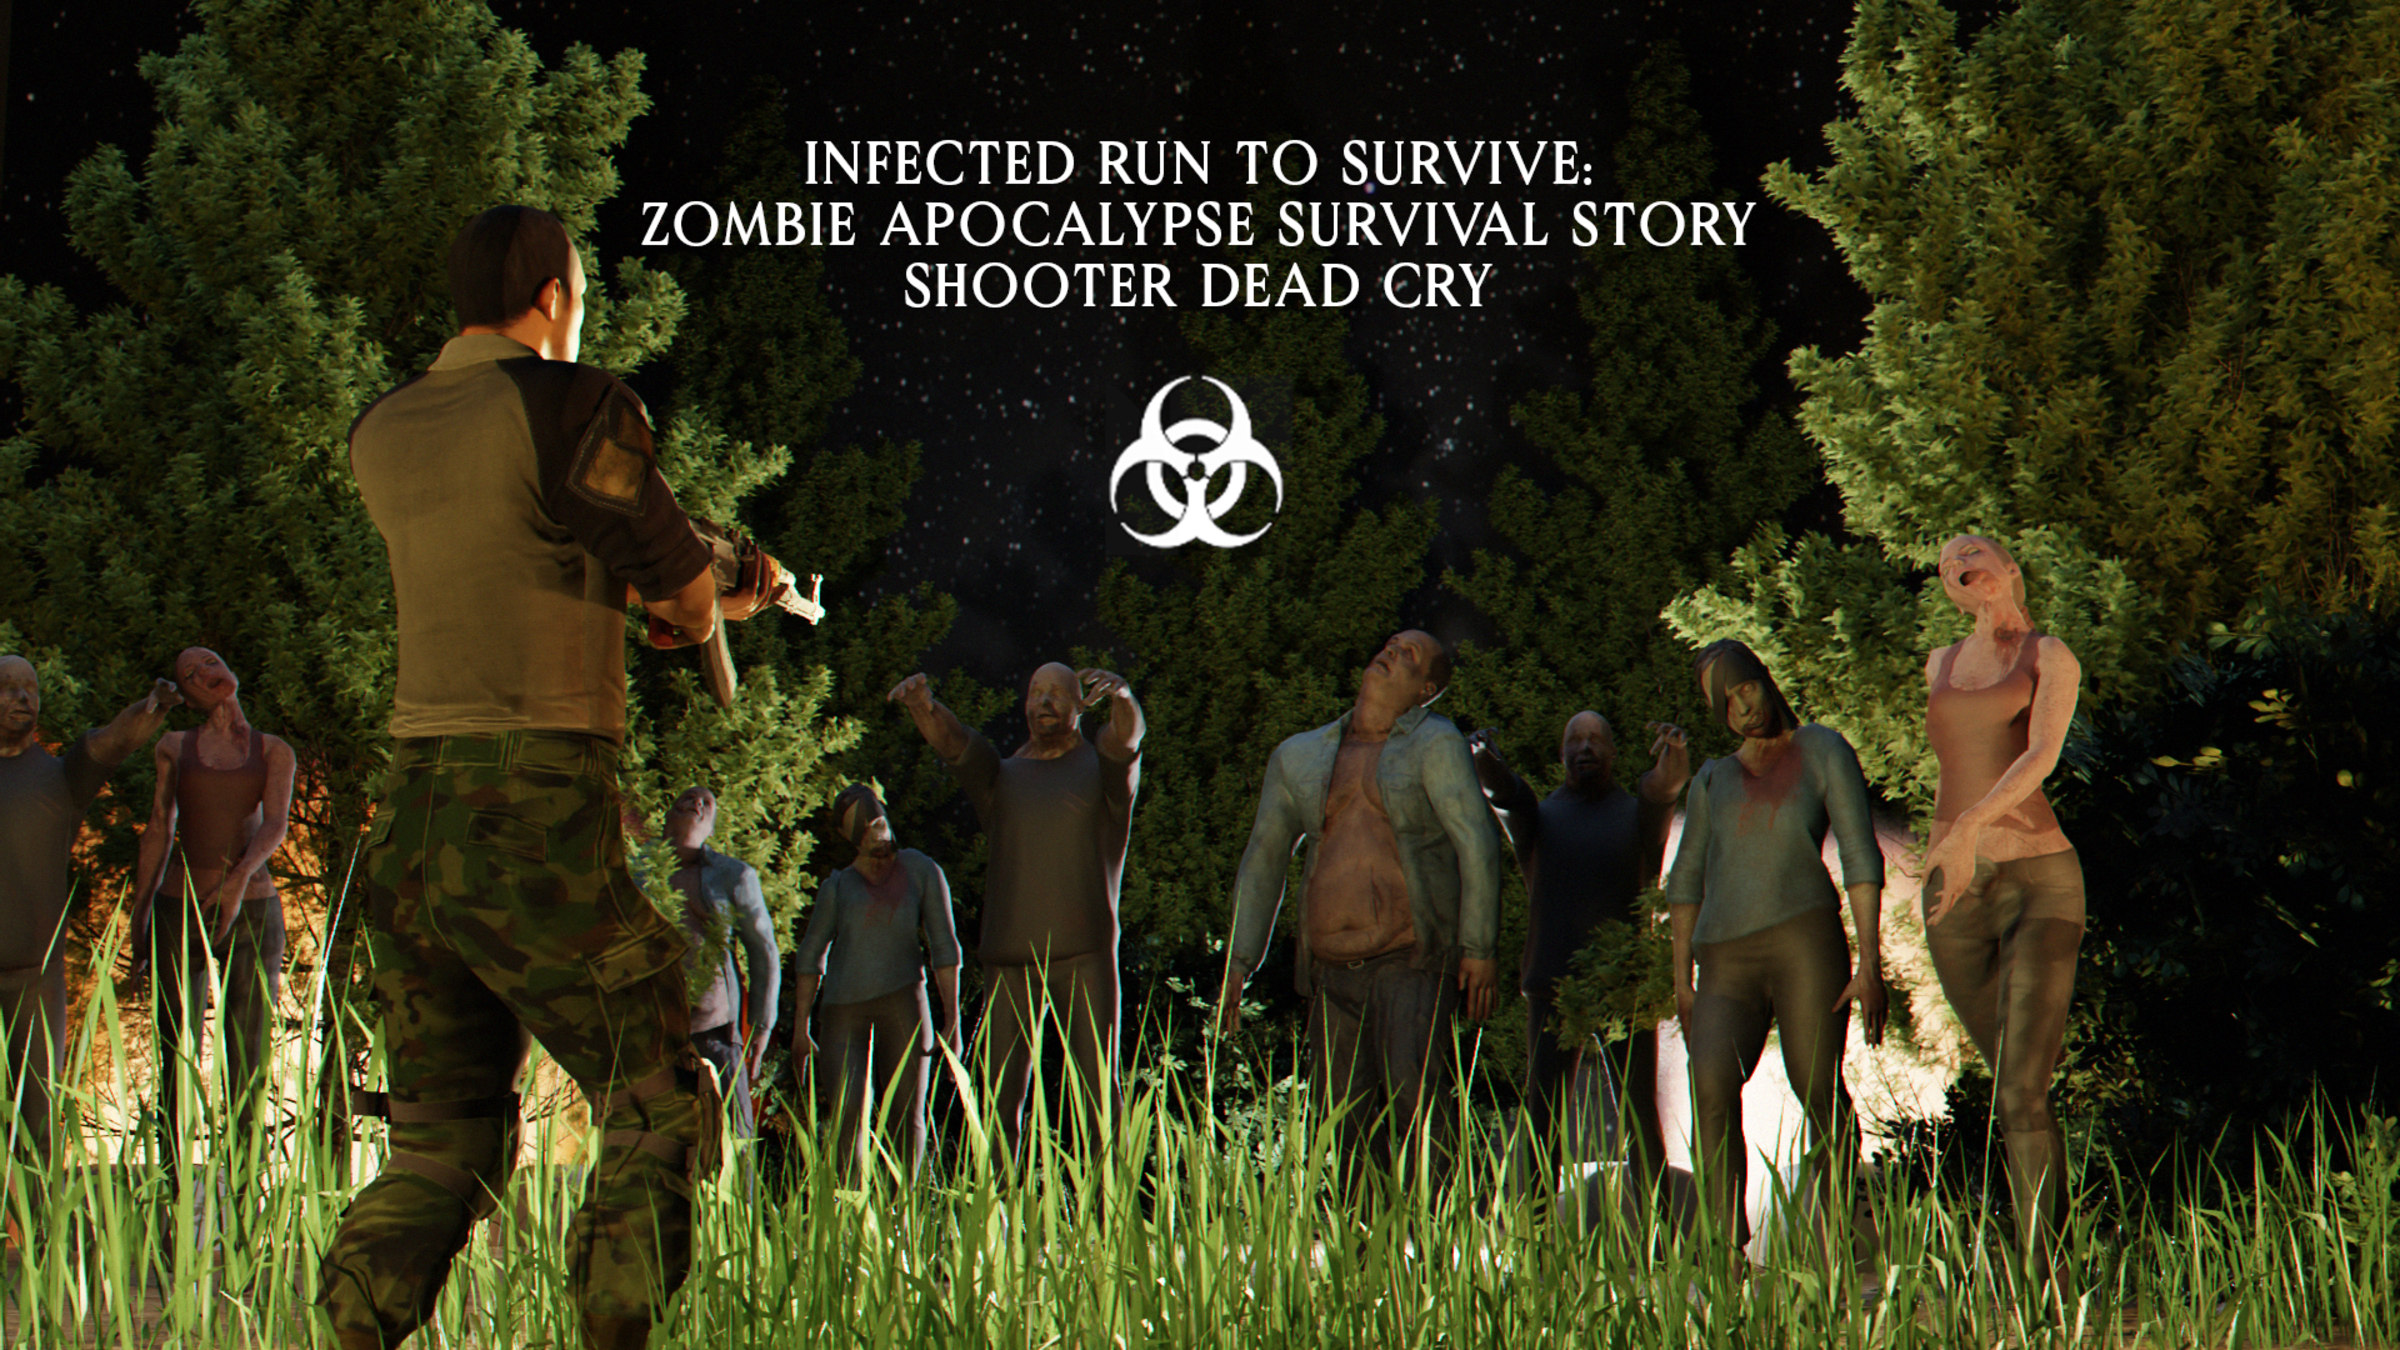 https://assets.nintendo.com/image/upload/c_fill,w_1200/q_auto:best/f_auto/dpr_2.0/ncom/en_US/games/switch/i/infected-run-to-survive-zombie-apocalypse-survival-story-shooter-dead-cry-switch/